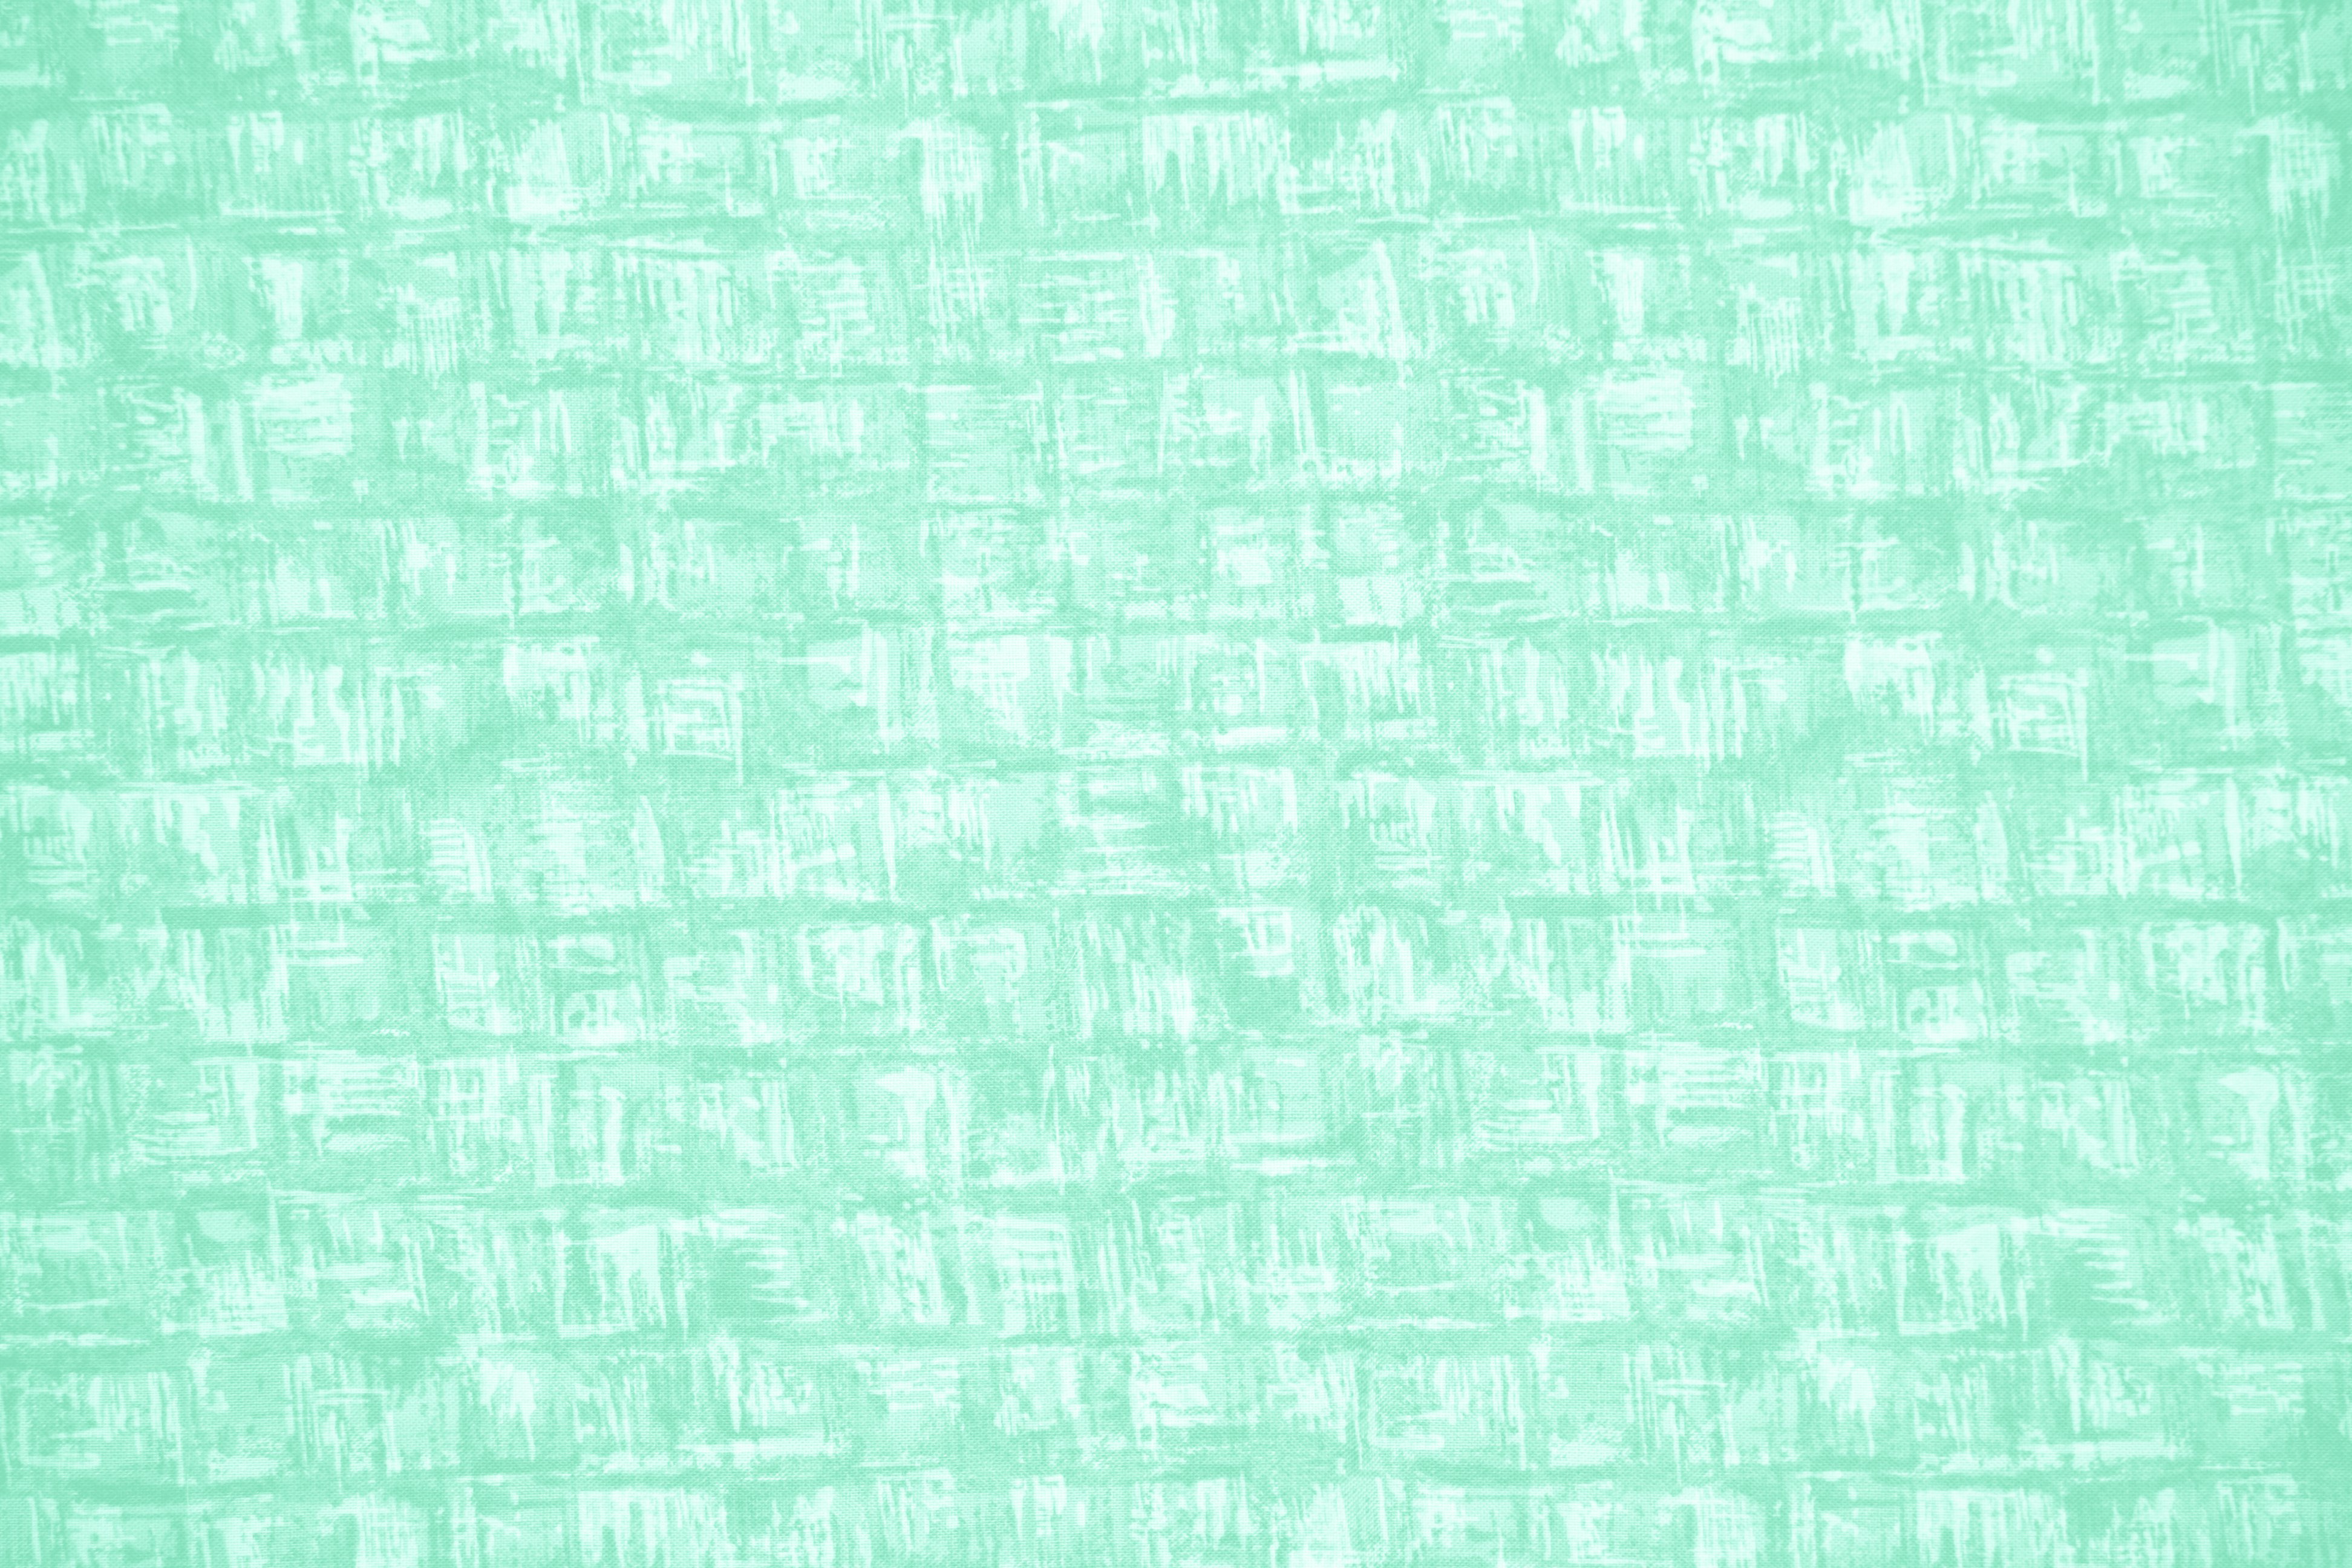 Mint Green Abstract Squares Fabric Texture Picture | Free Photograph |  Photos Public Domain